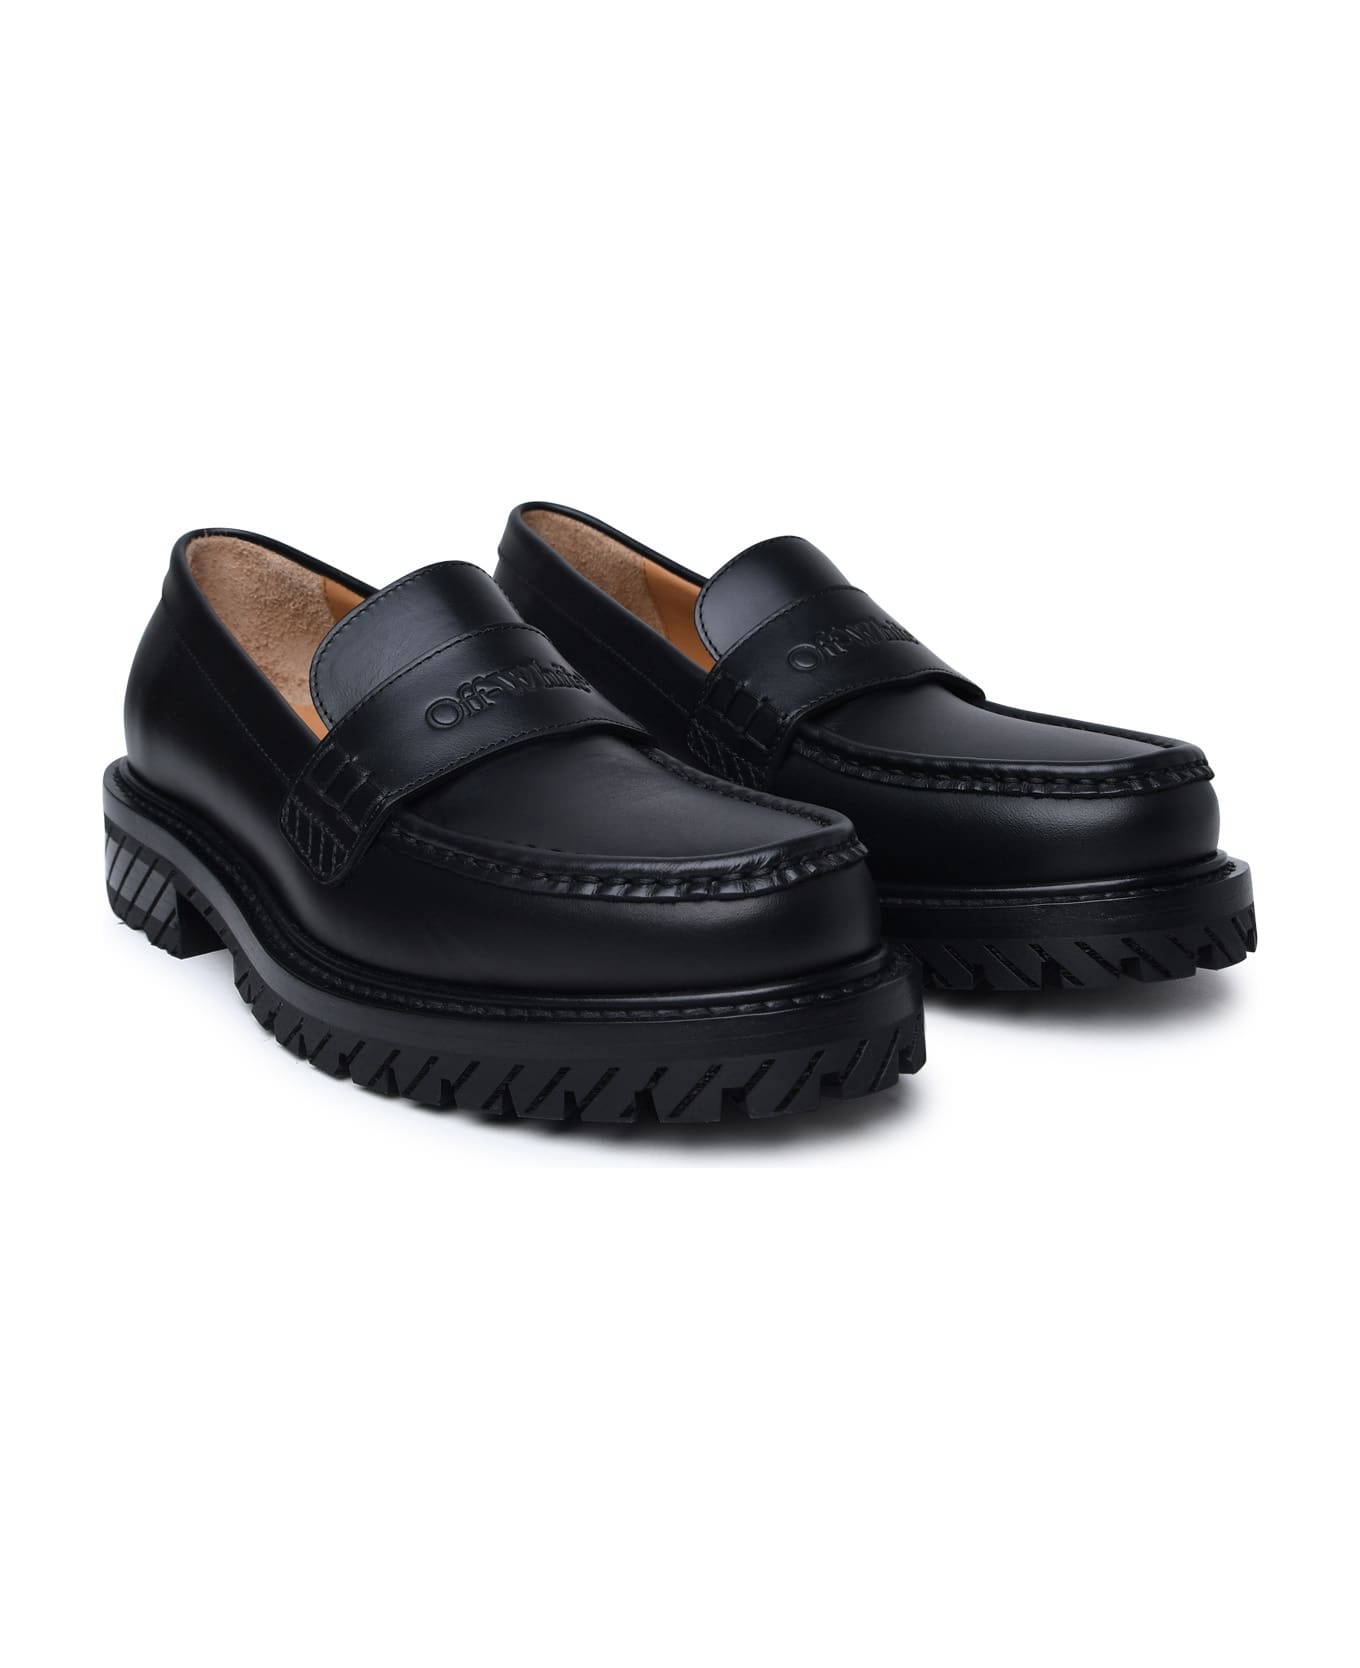 Off-White Leather Loafers - Black フラットシューズ